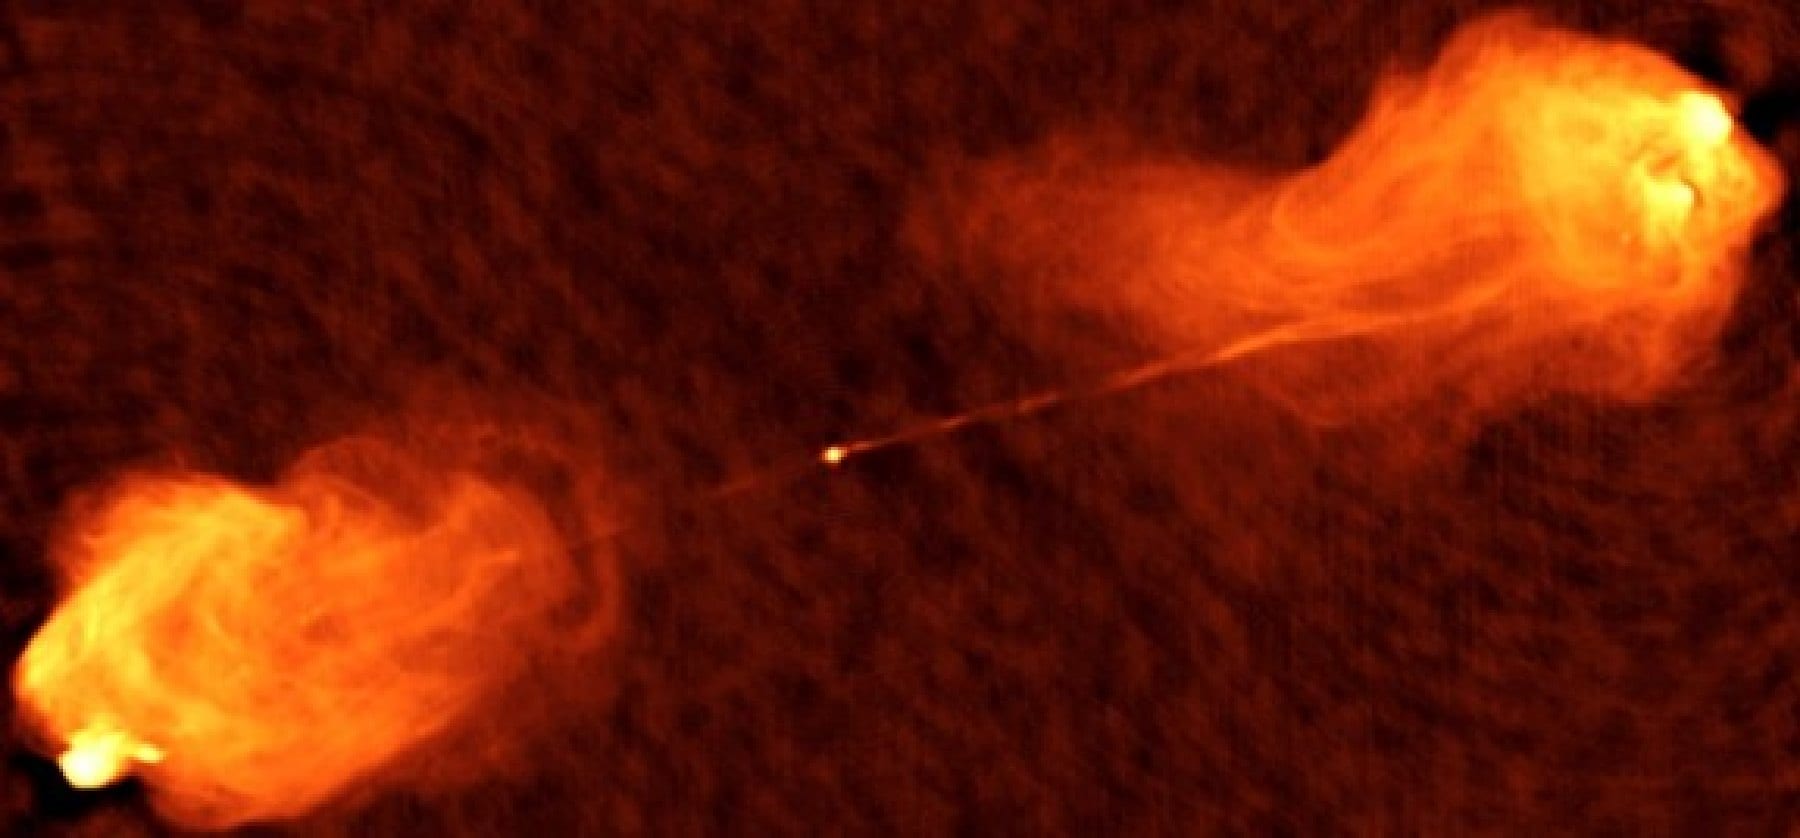 Figure 2. A radio image of the nucleus, jets, and outer lobes of the radio galaxy Cygnus A. The plasma jets are approximately 500,000 light years across, or over 5 times the size of our Milky Way galaxy (image courtesy NRAO).